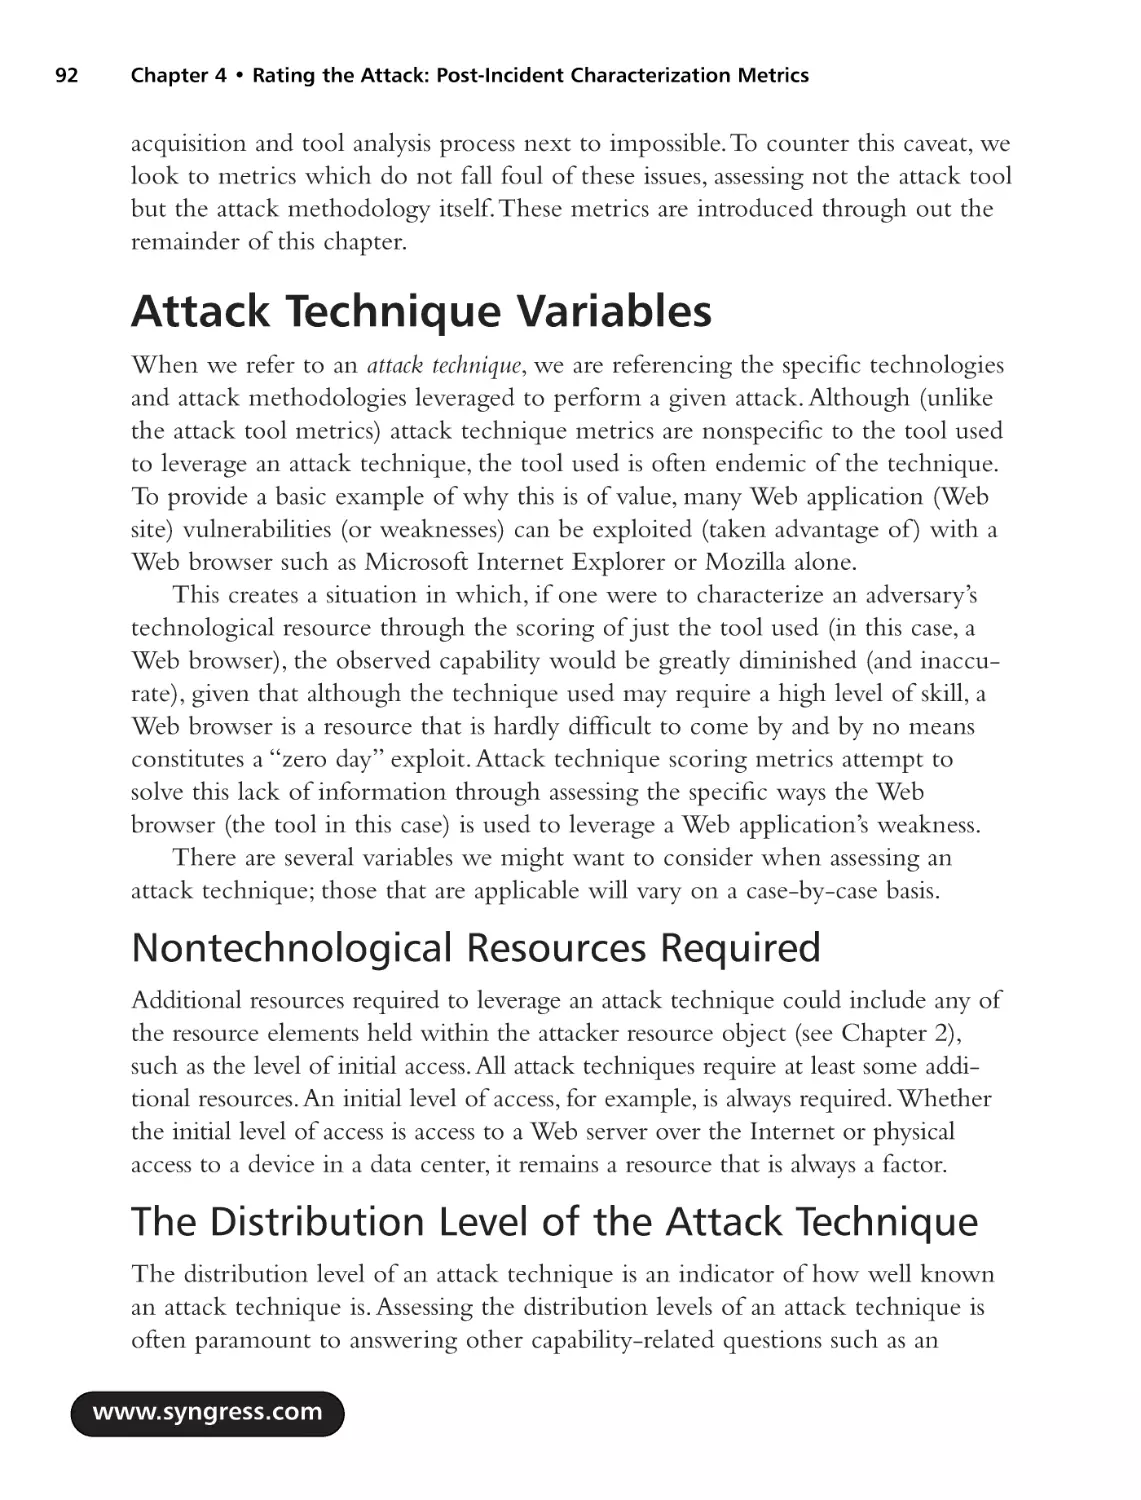 Attack Technique Variables
Nontechnological Resources Required
The Distribution Level of the Attack Technique